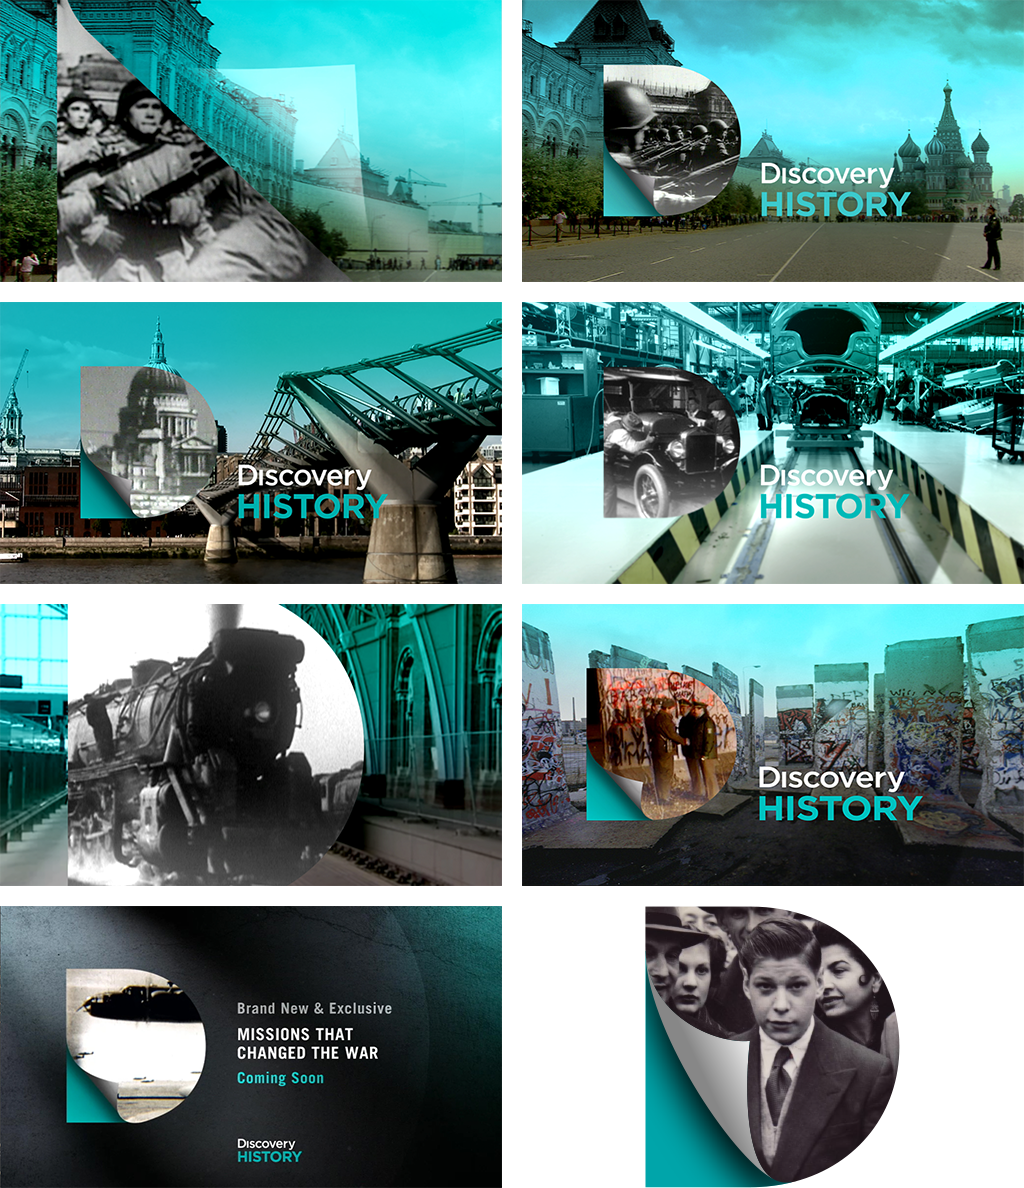 Adobe Portfolio discovery Discovery History page curl history st pauls Brooklyn Bridge red square berlin wall Idents bumpers logo turquoise pete graphics brand new